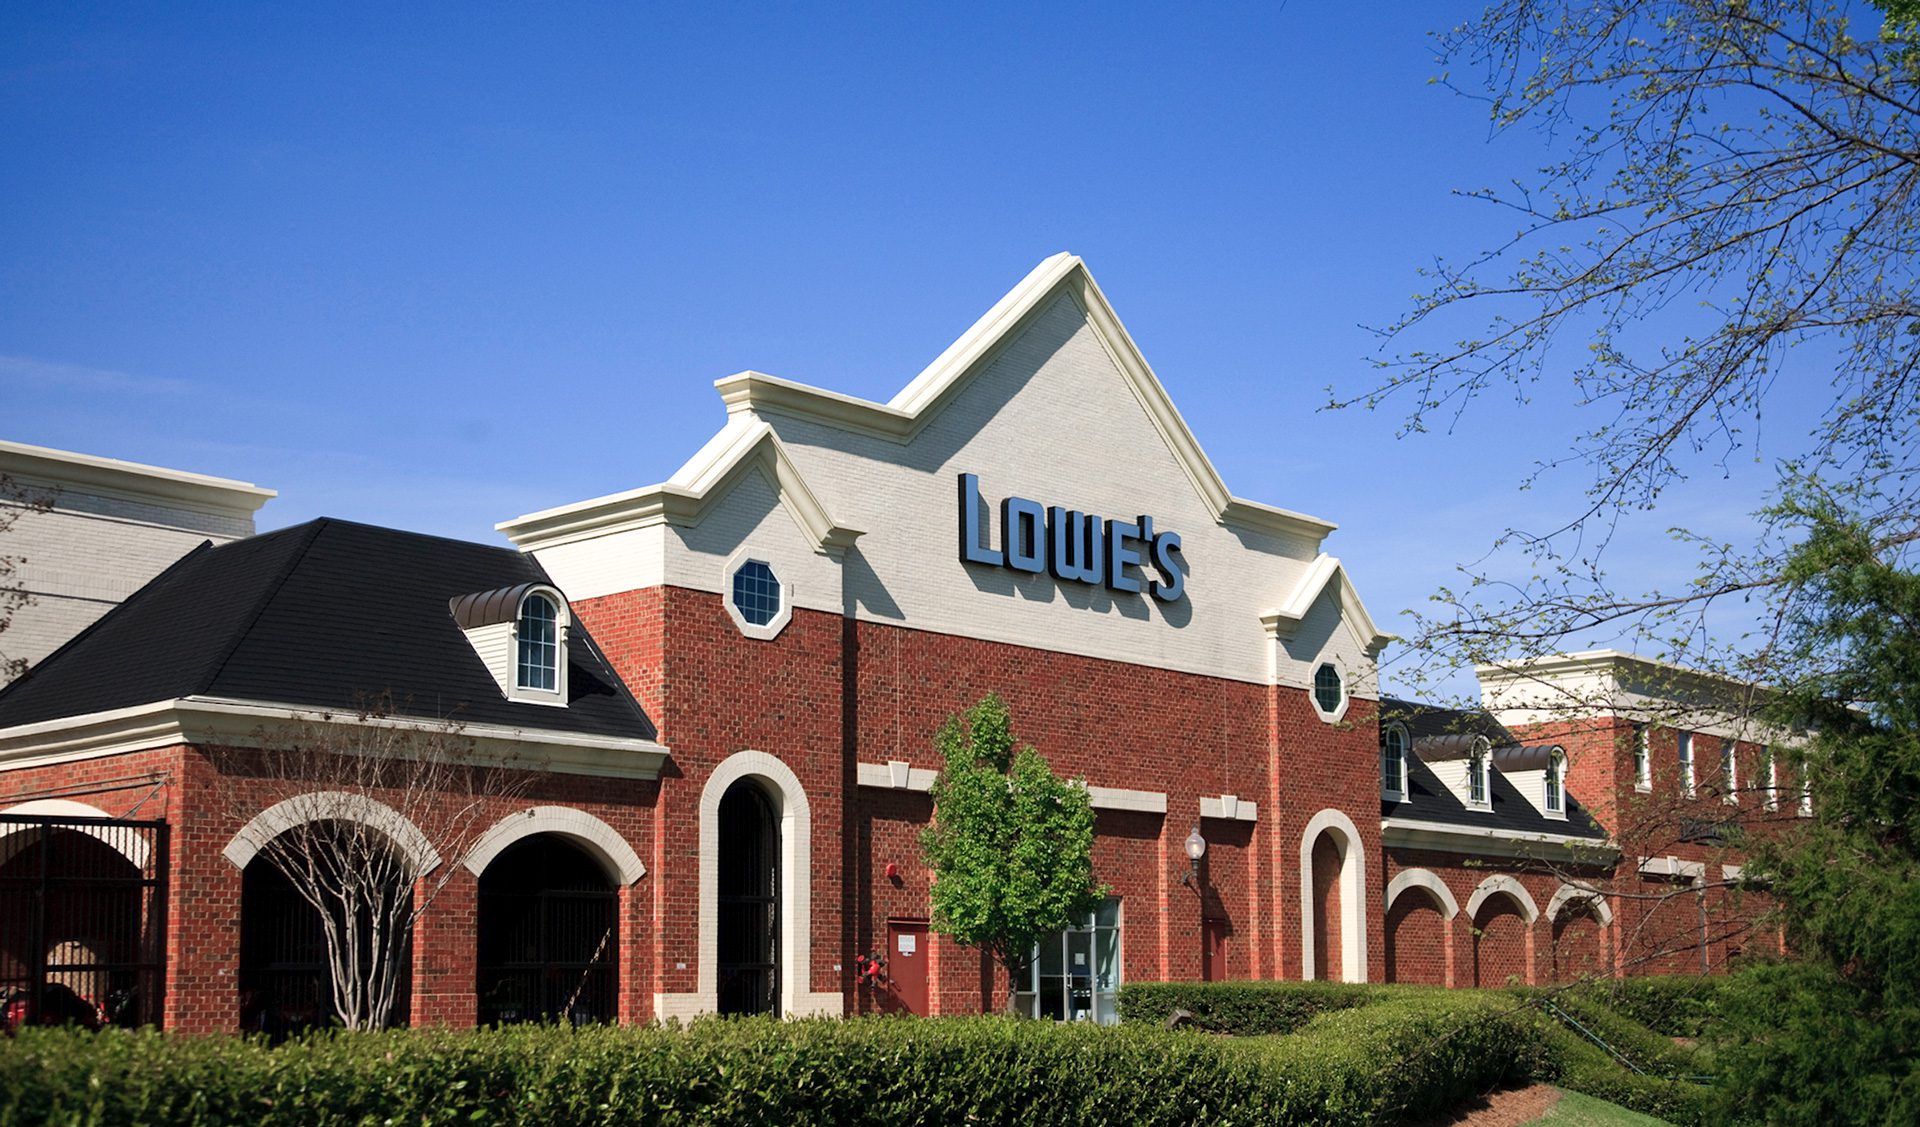 Lowe's Home Improvement at Providence Commons exterior brick